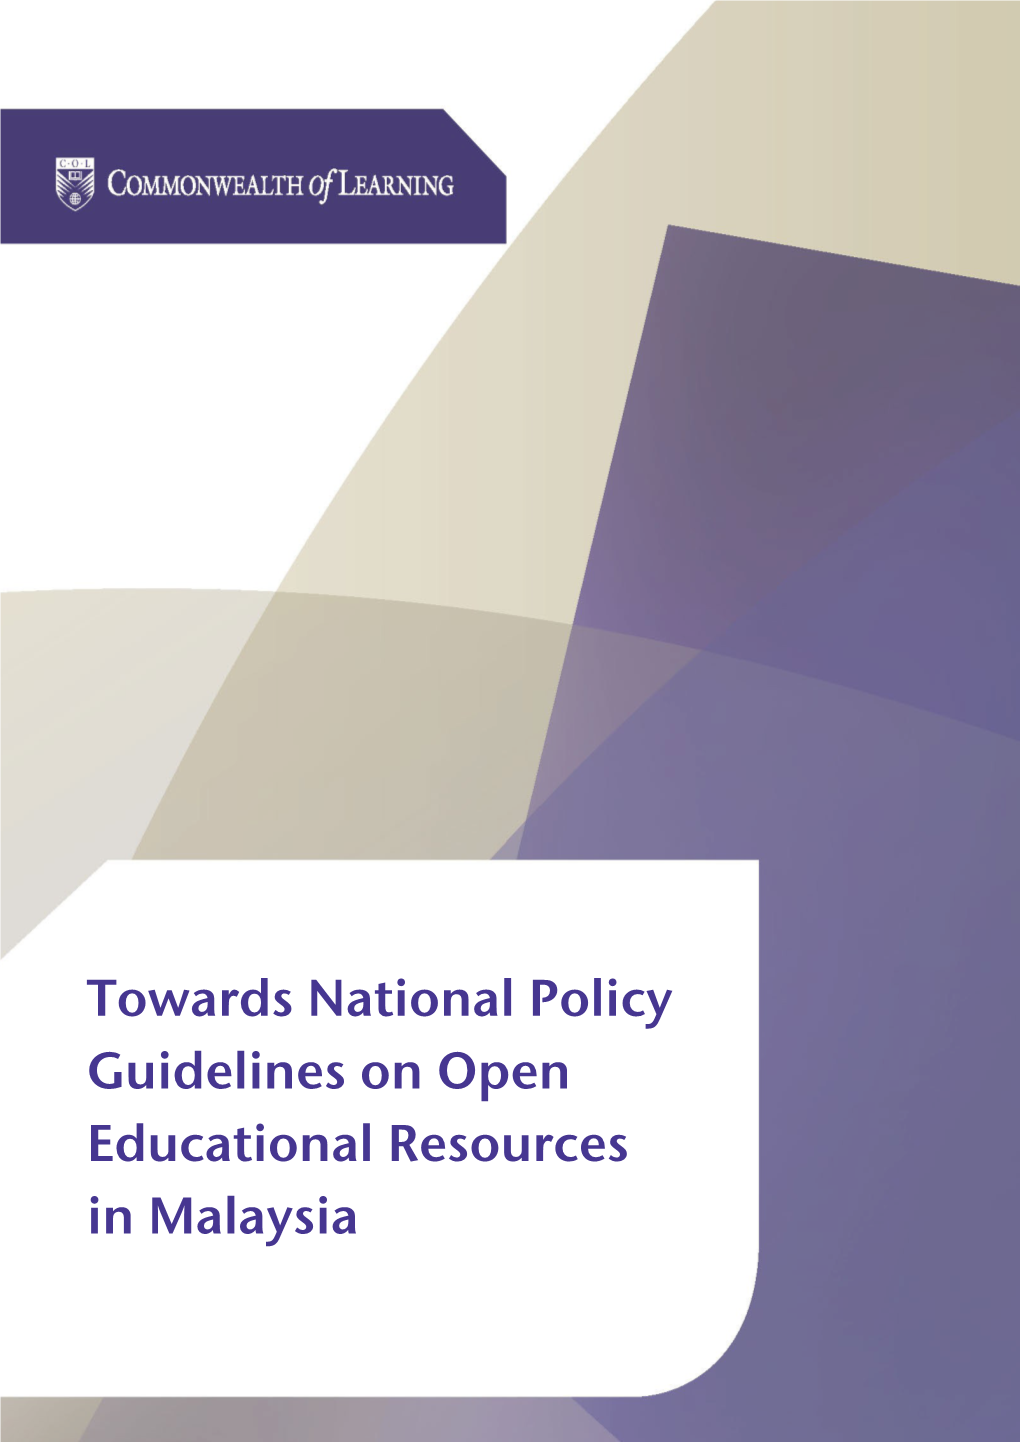 Towards National Policy Guidelines on Open Educational Resources in Malaysia